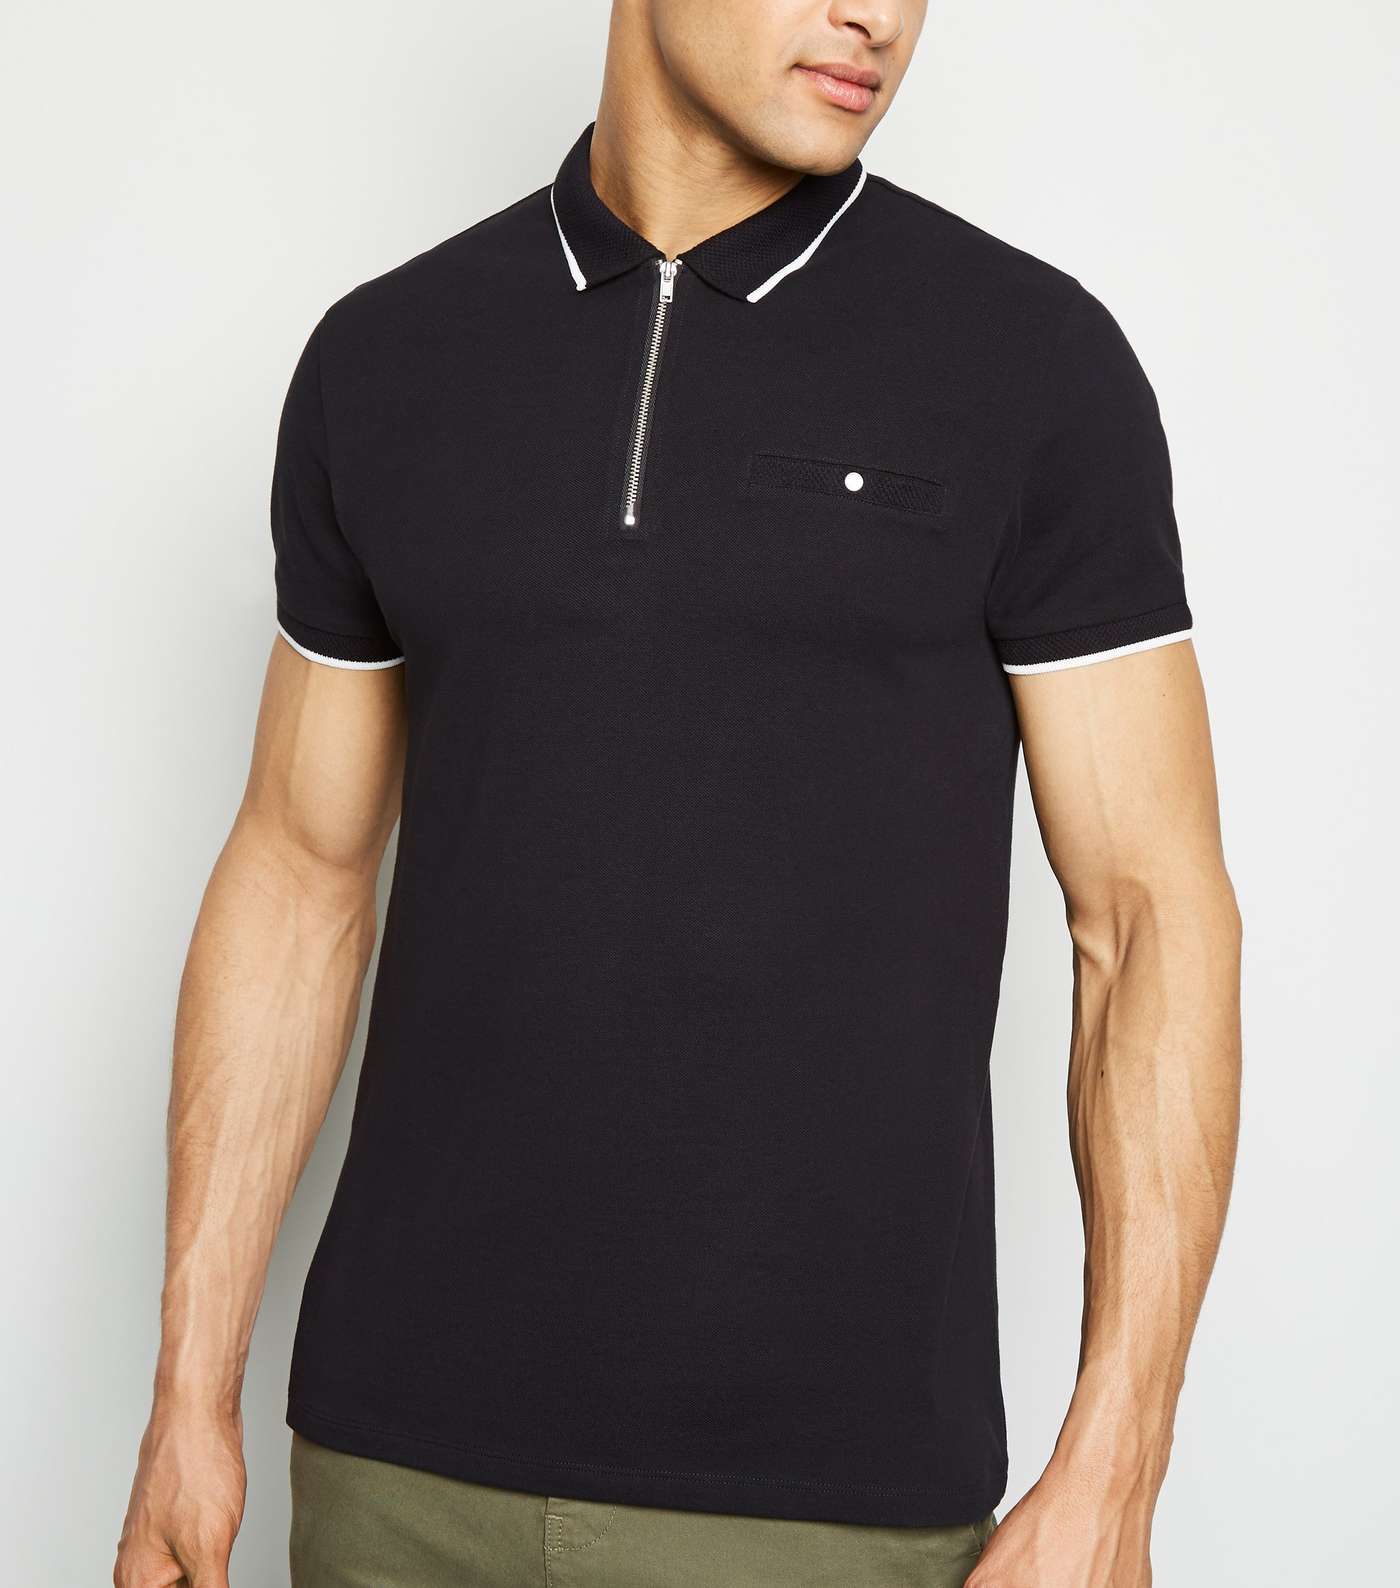 Black Tipped Zip Front Polo Shirt